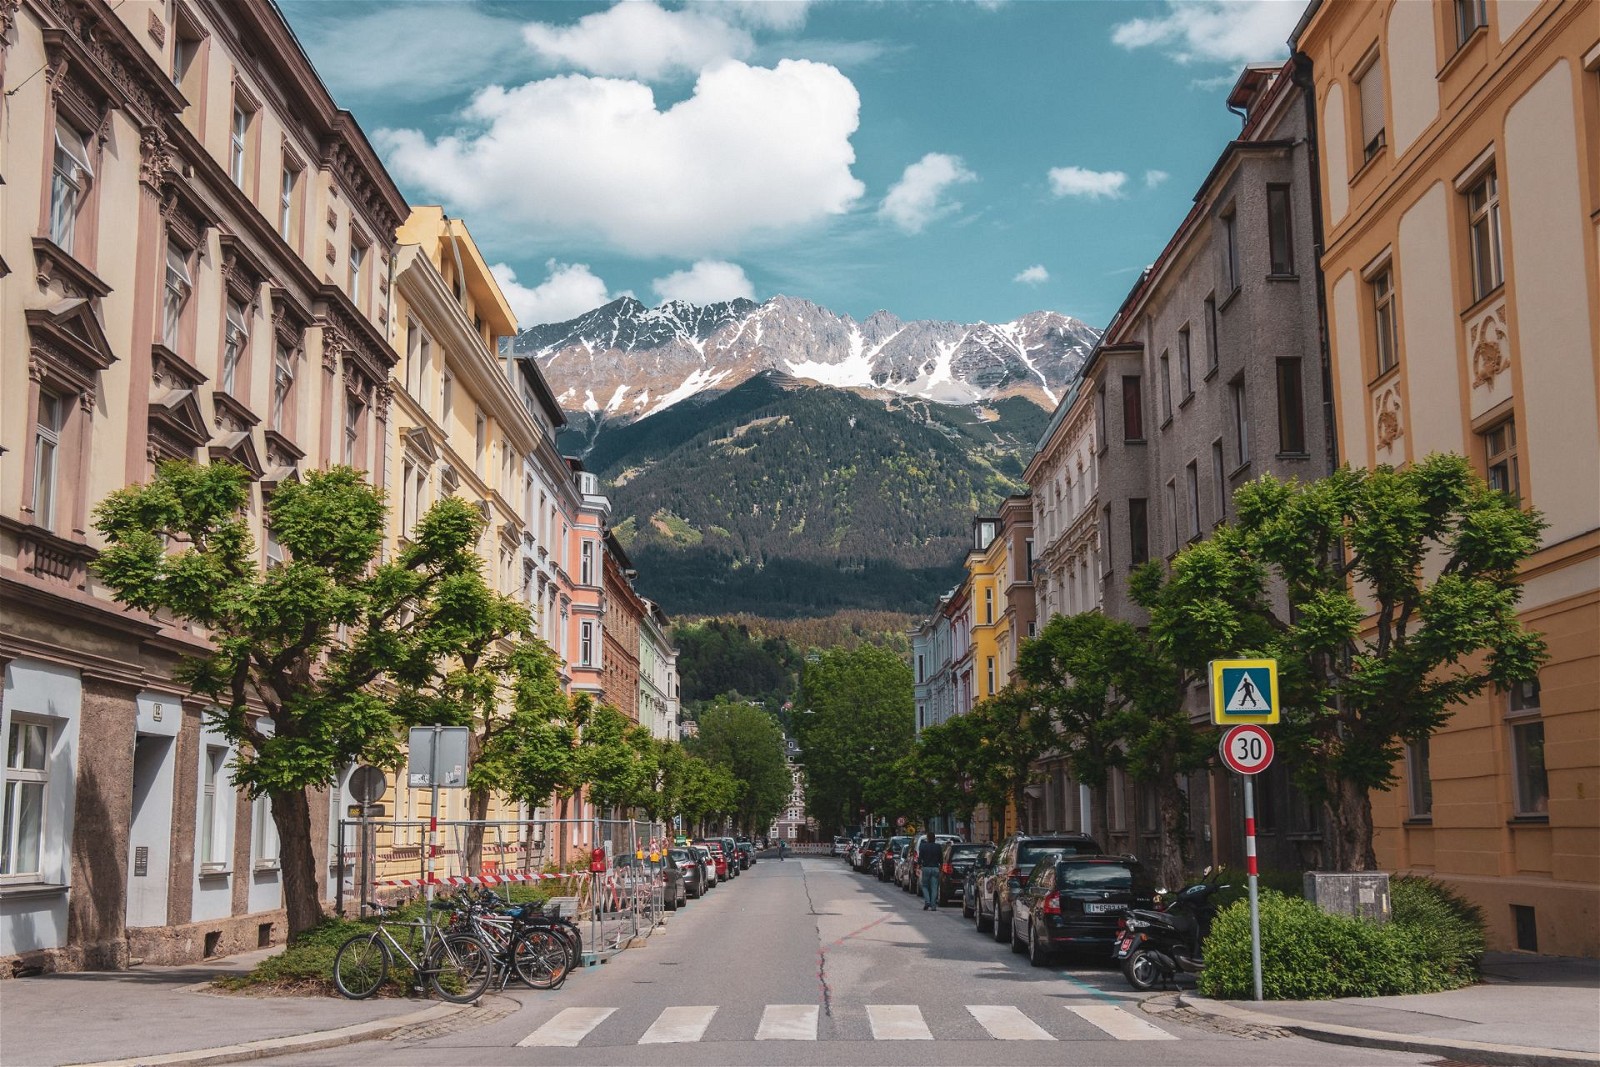 A Brief Historical and Cultural Background of Innsbruck, Austria